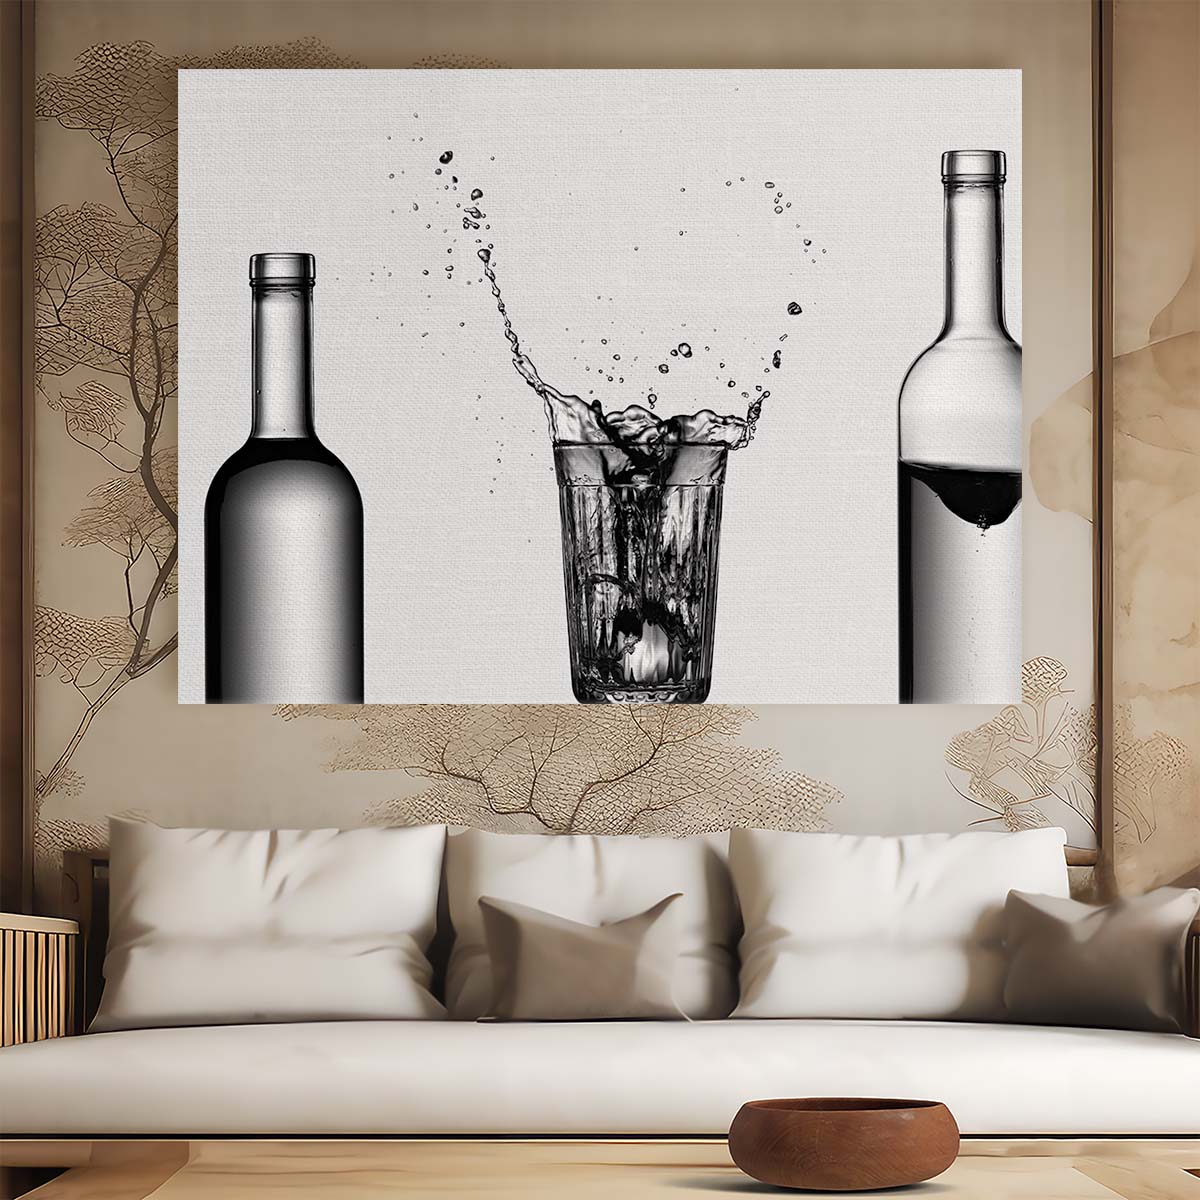 Icy Splash Wine & Water Bottles Panoramic Wall Art by Luxuriance Designs. Made in USA.